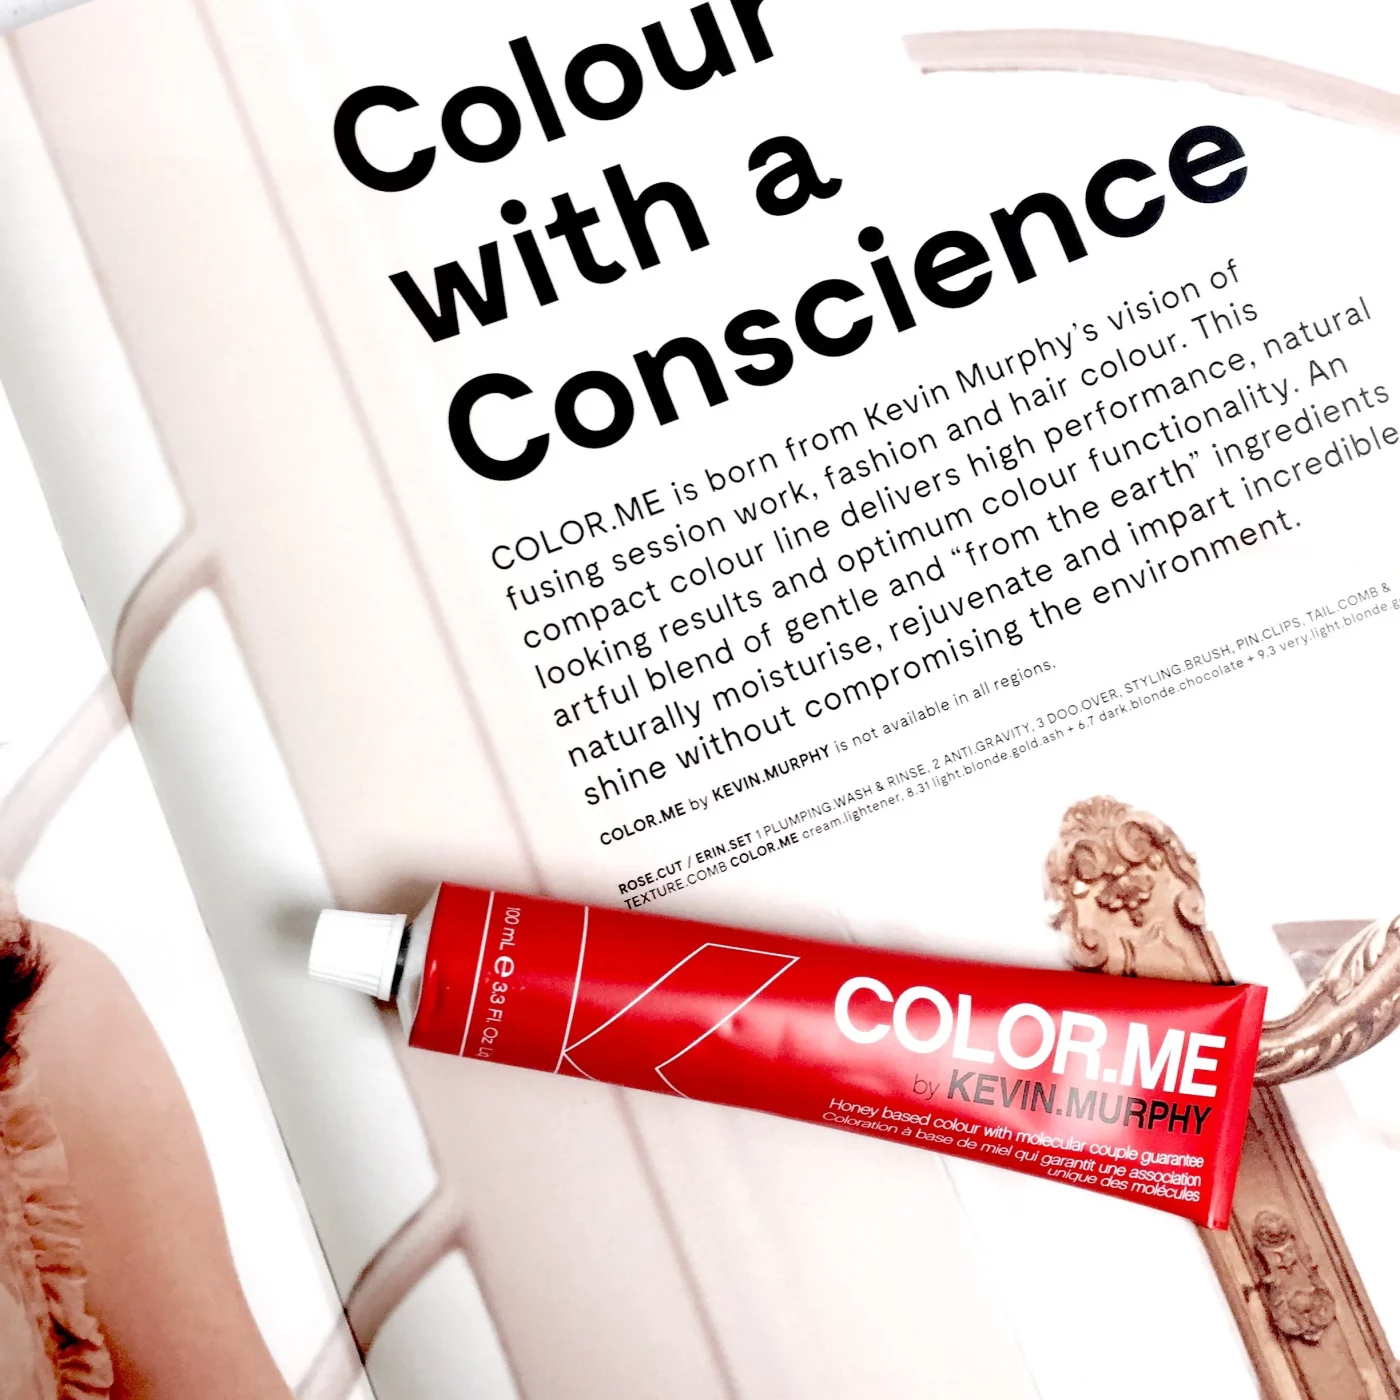 a page in a magazine about conscious hair colouring. On top lays a red tube of color.me by kevin murphy